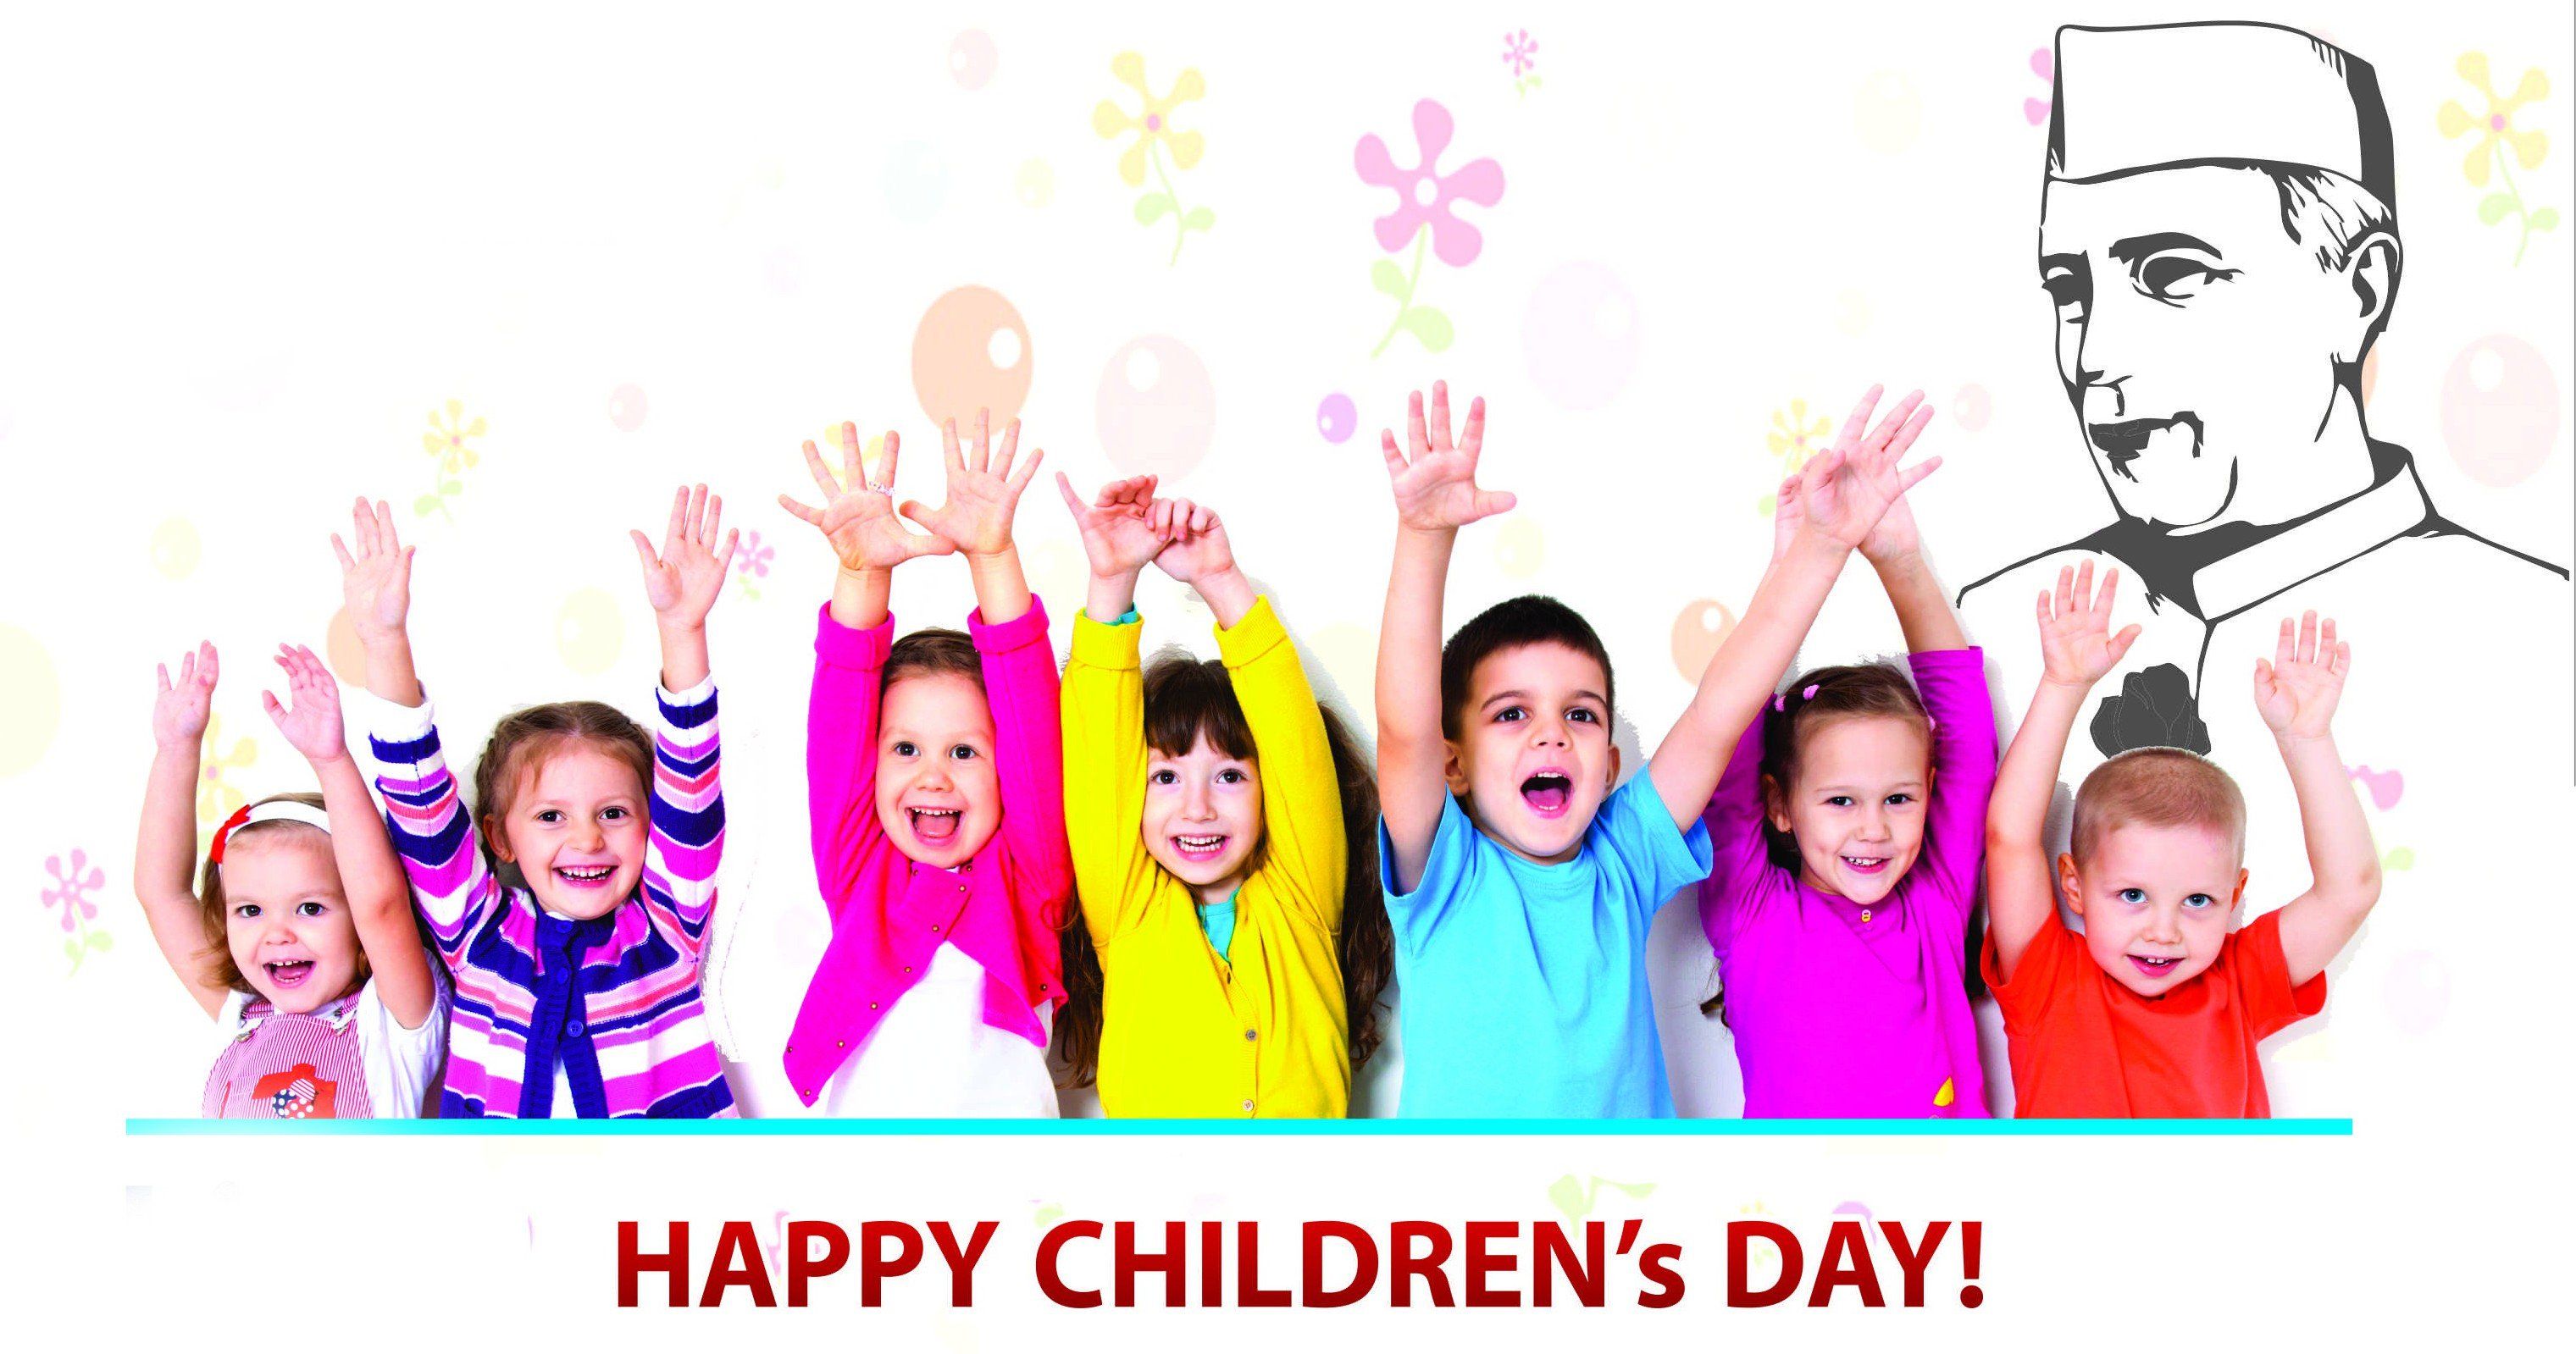 Happy Children's Day 2019 Hd Images For Mobile